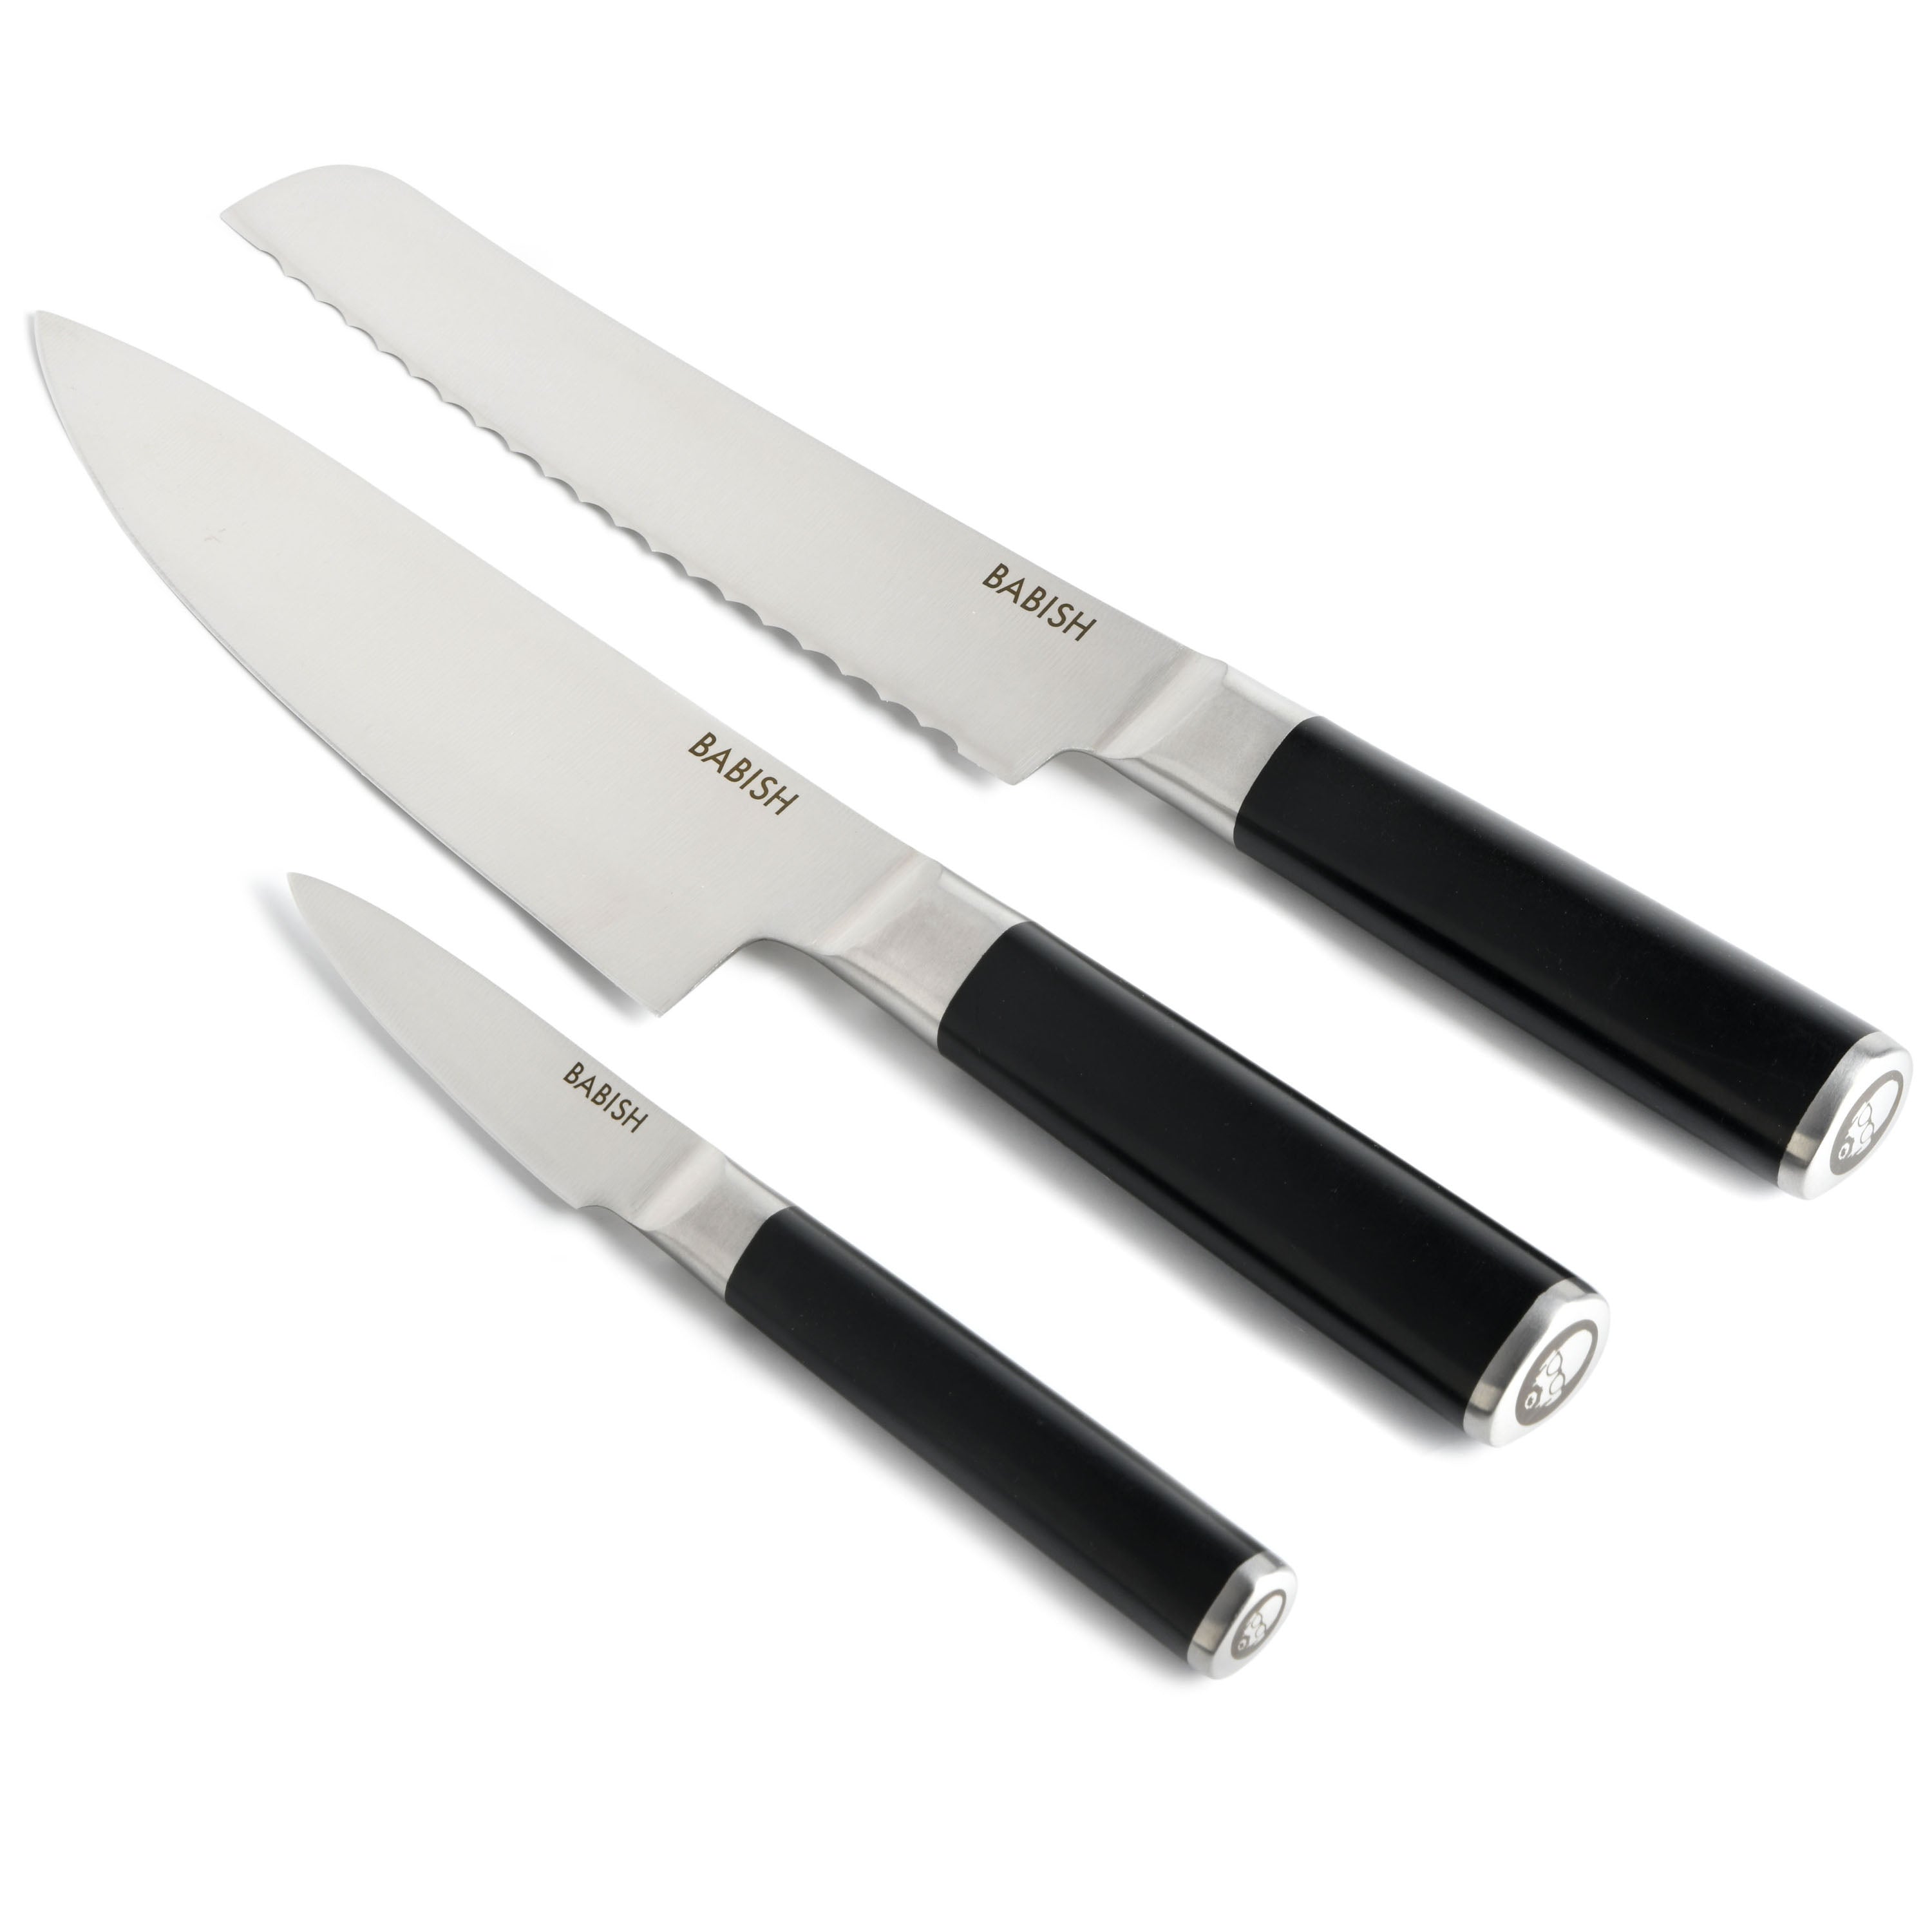 Babish High-Carbon 1.4116 German Steel 3-Piece Cutlery Set (Chef Knife, Bread Knife, & Pairing Knife) w/Knife Roll